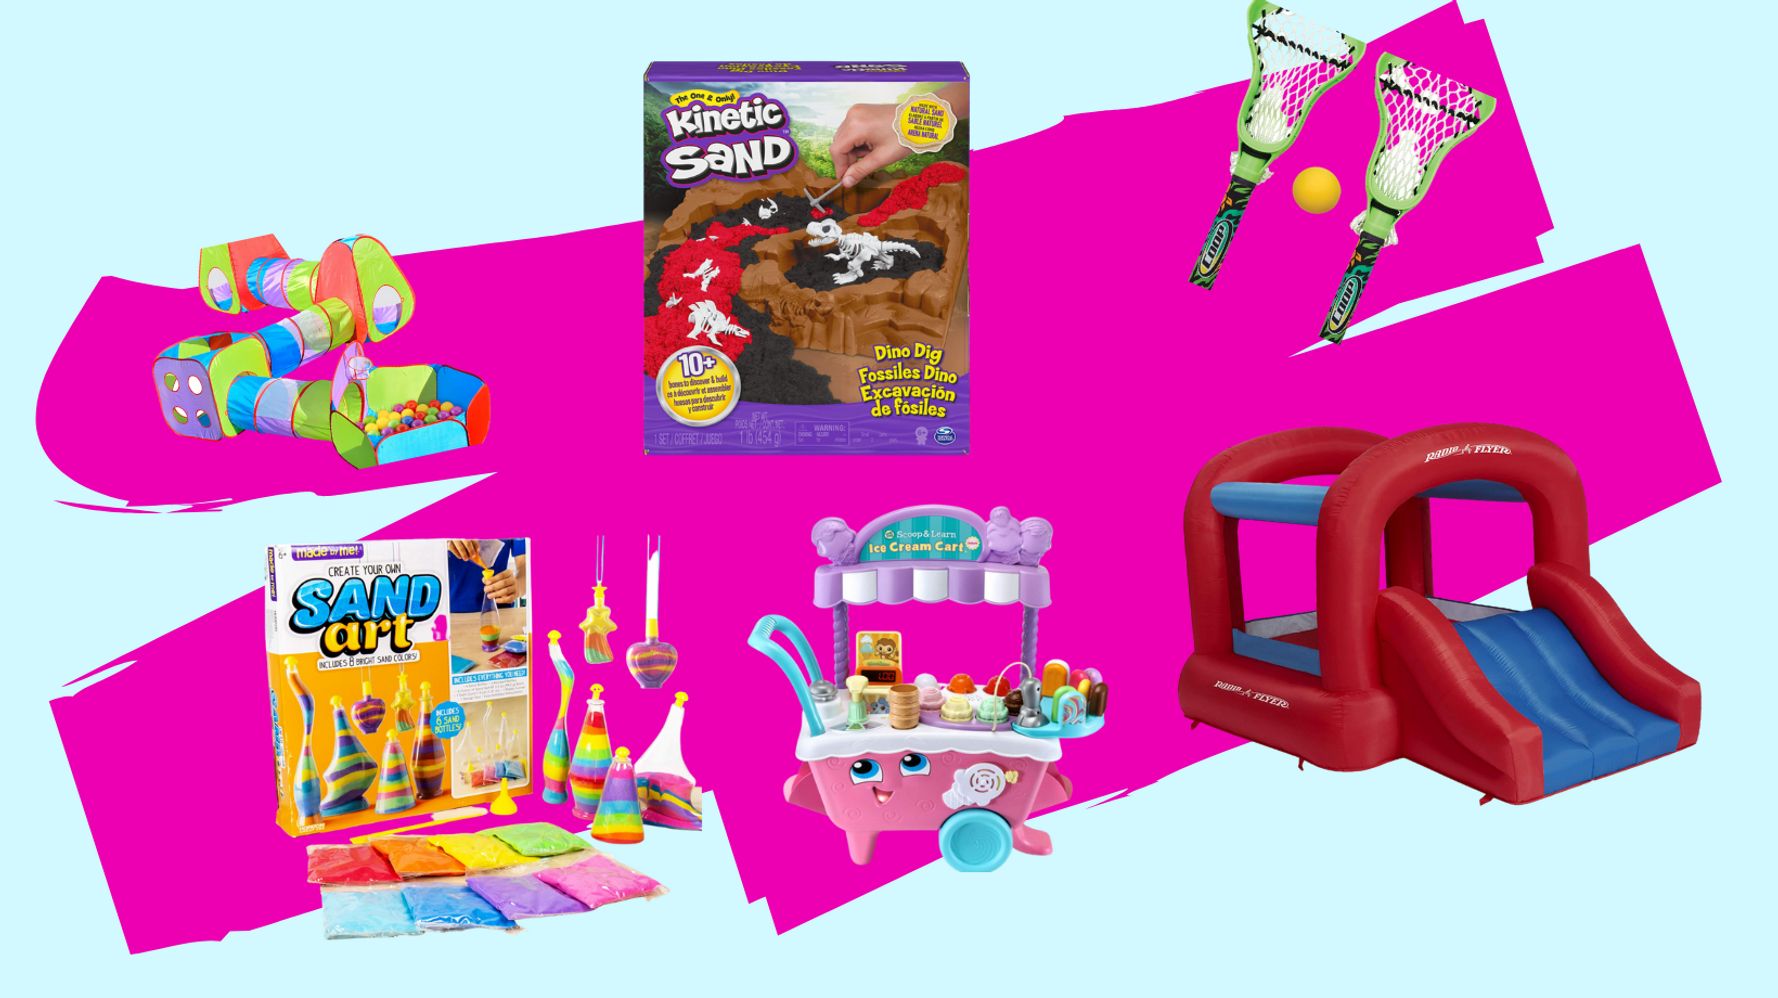 Amazon Prime Day Deals On Toys To Keep The Kids Occupied All Summer